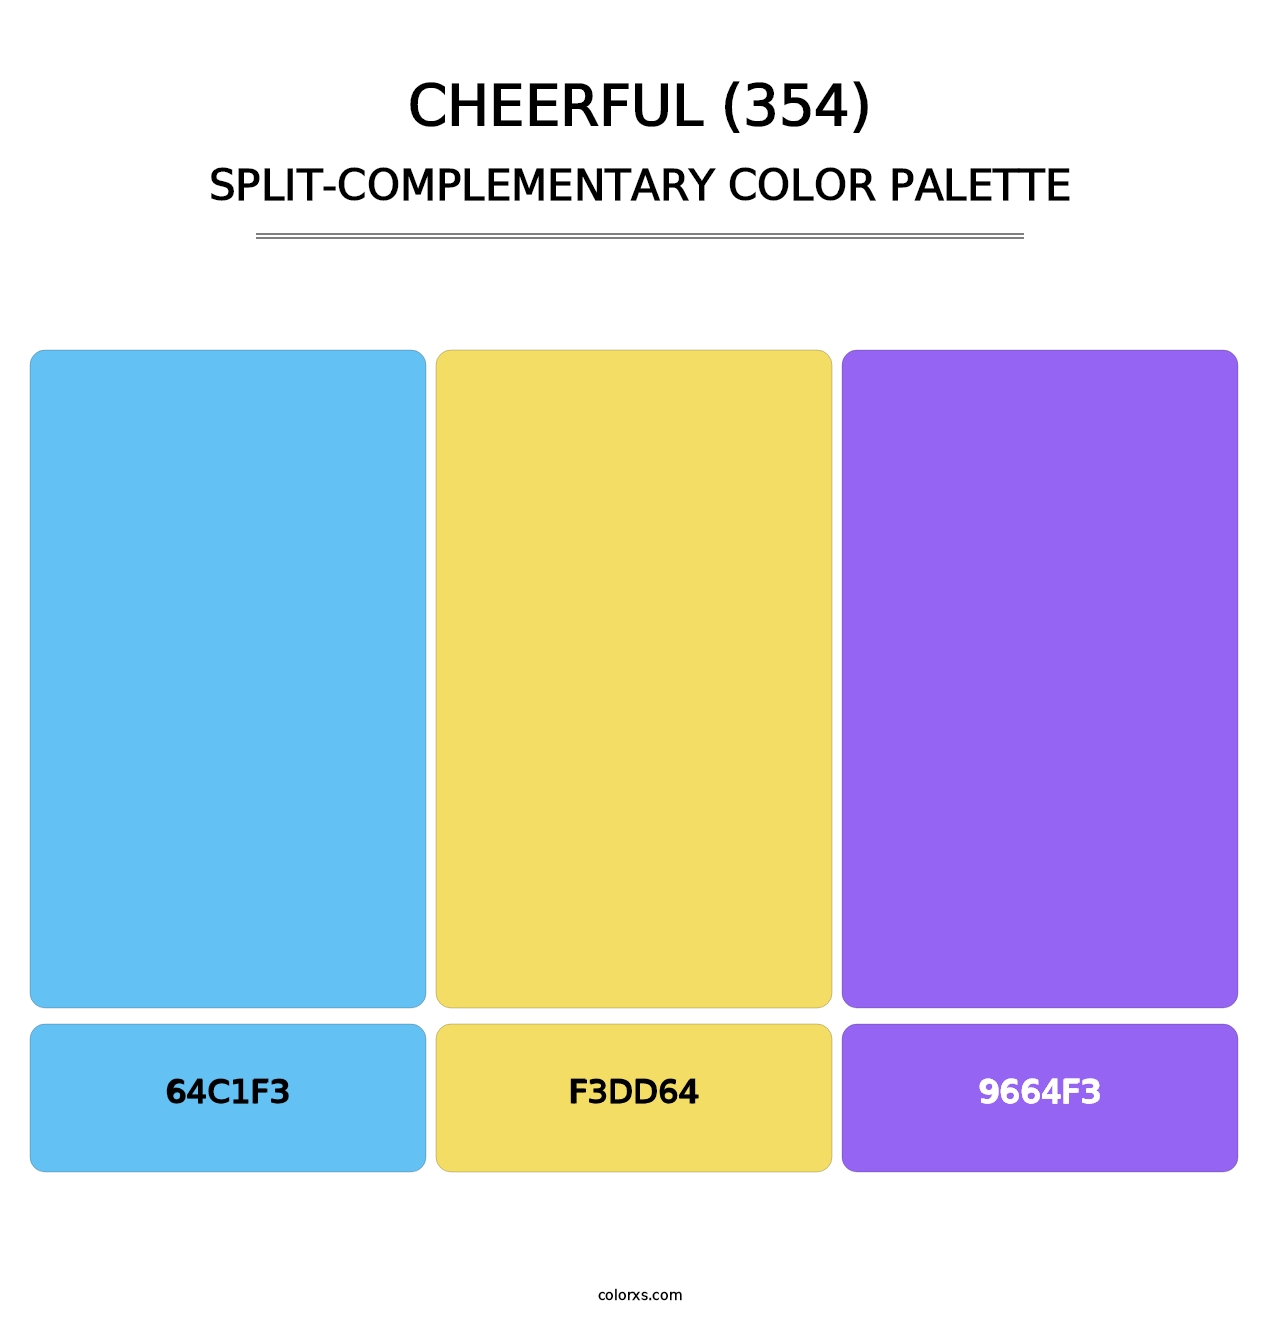 Cheerful (354) - Split-Complementary Color Palette